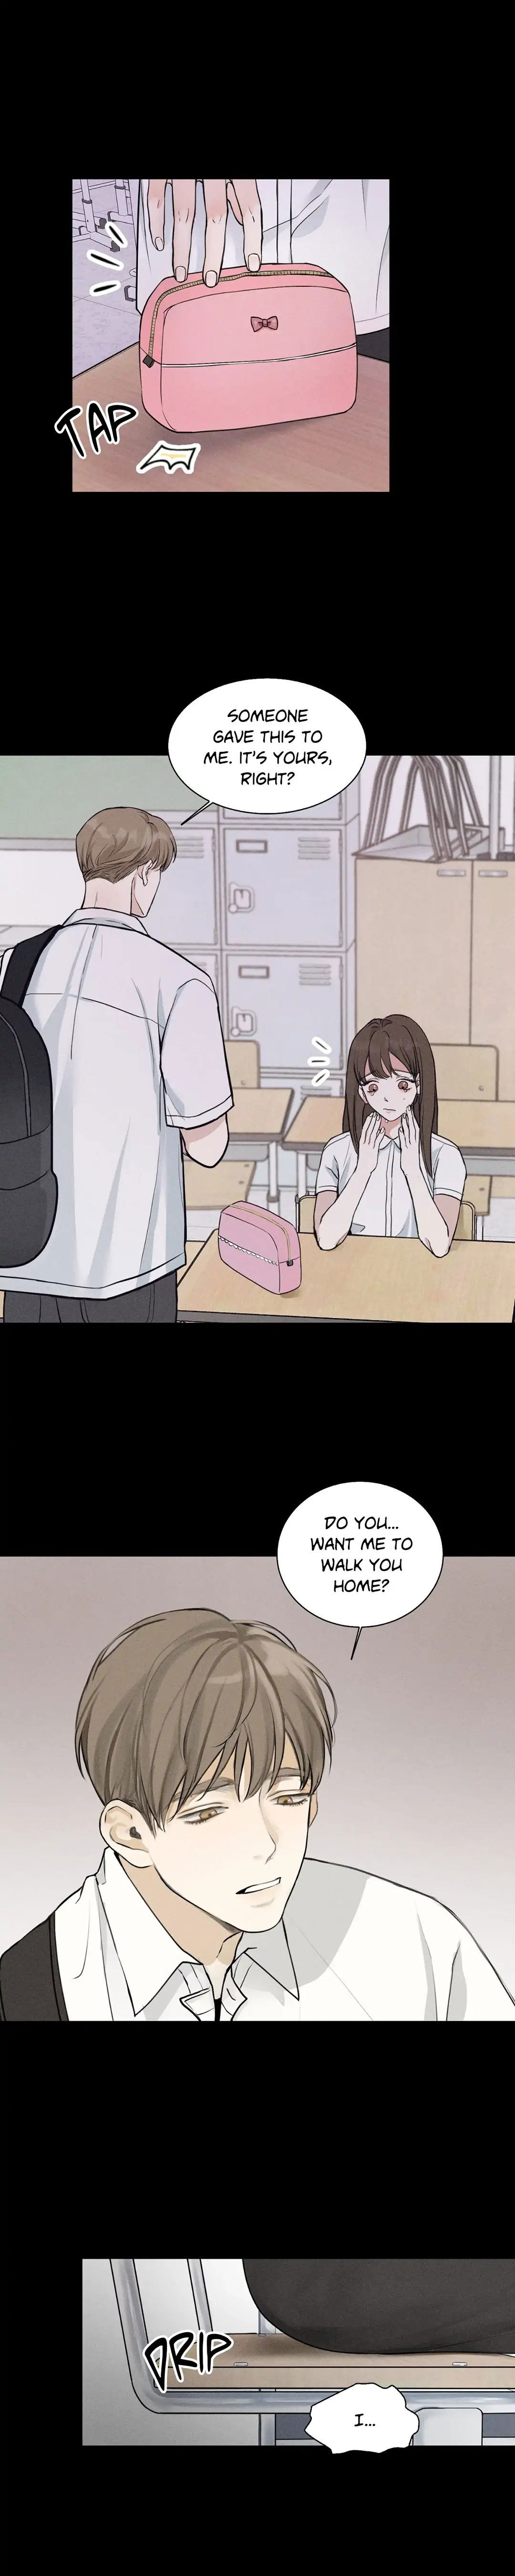 the-men-in-my-bed-chap-4-19